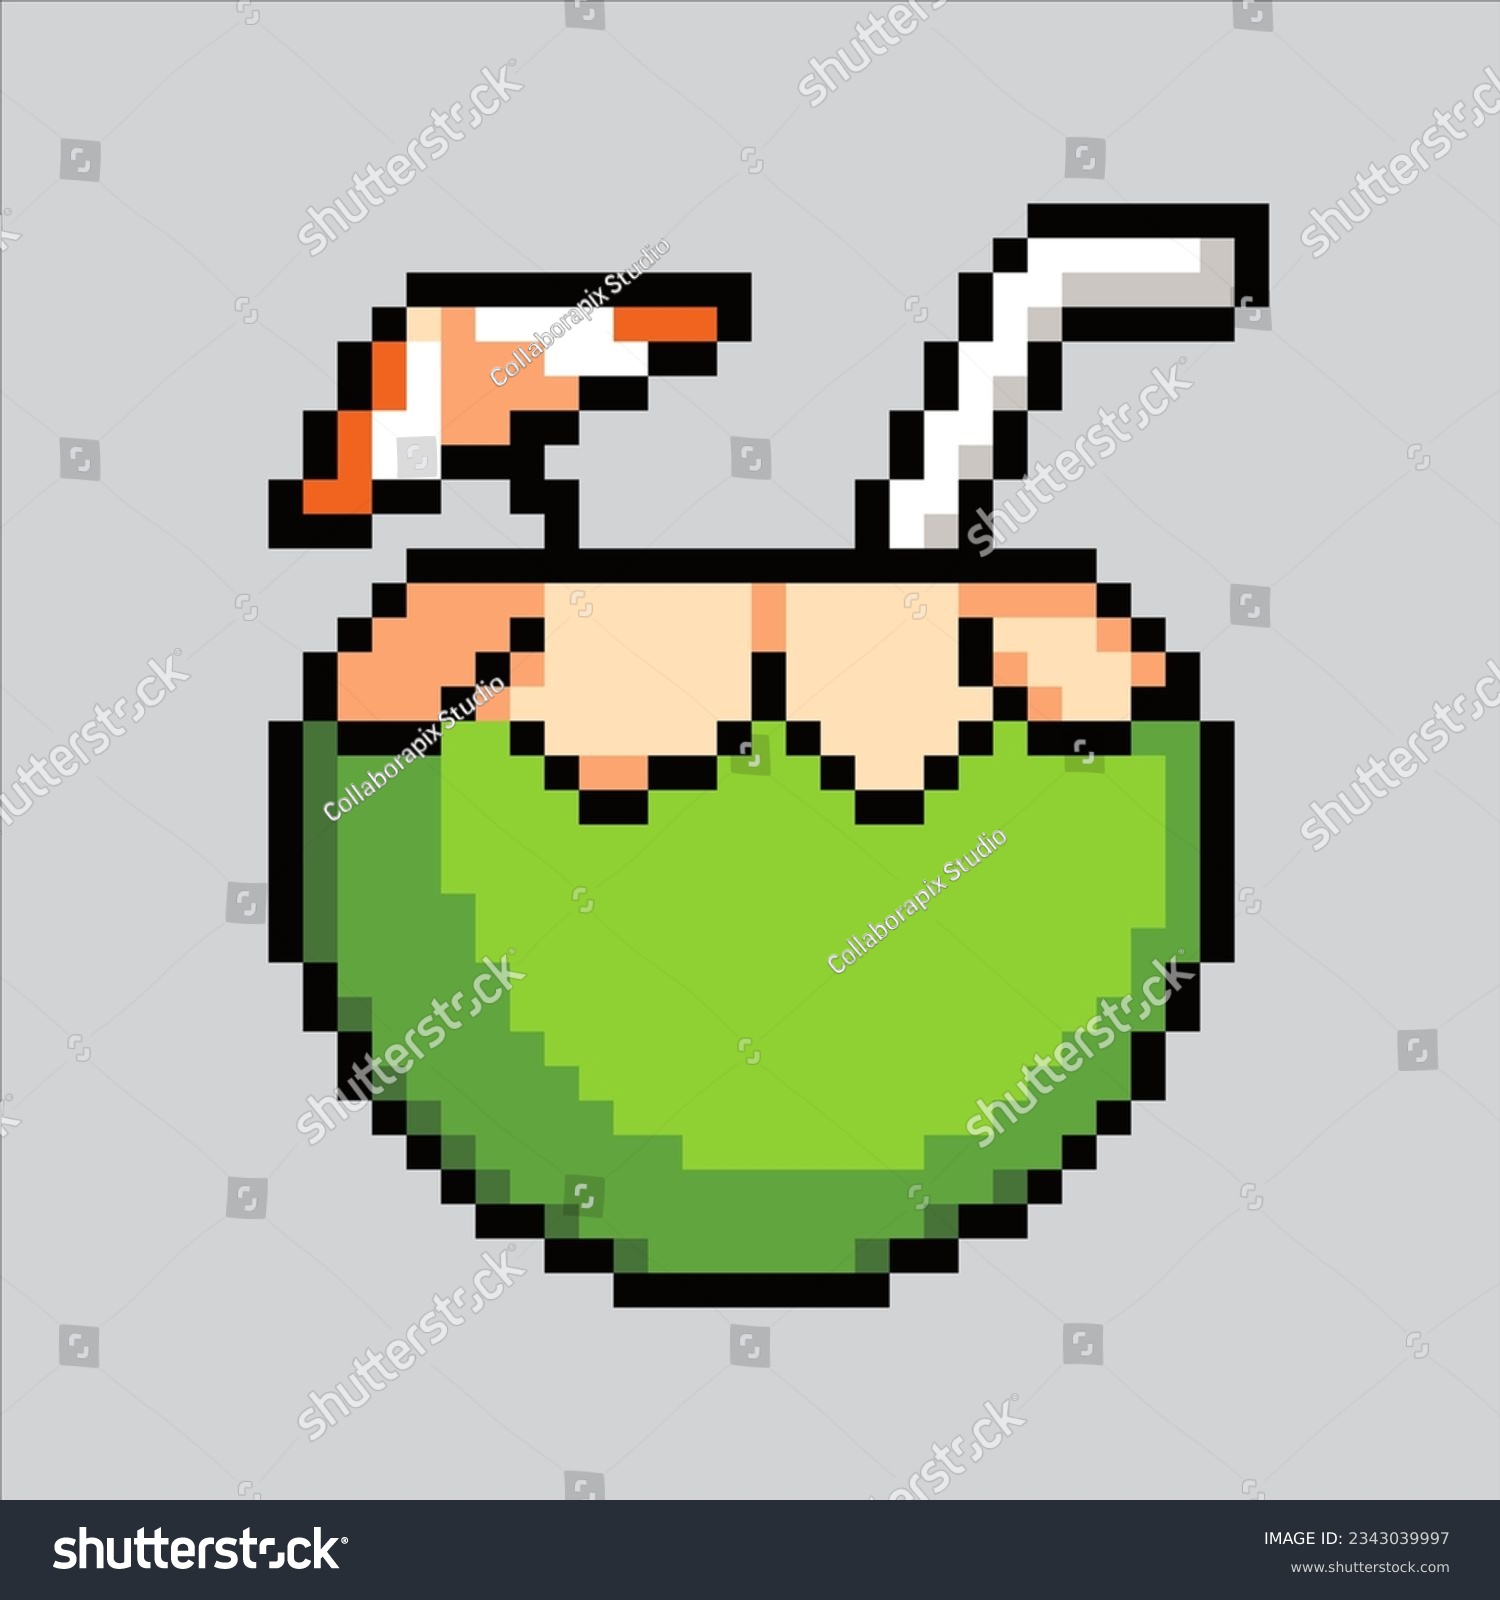 SVG of Pixel art illustration Coconut water. Pixelated Coconut. Coconut Water icon pixelated
for the pixel art game and icon for website and video game. old school retro. svg